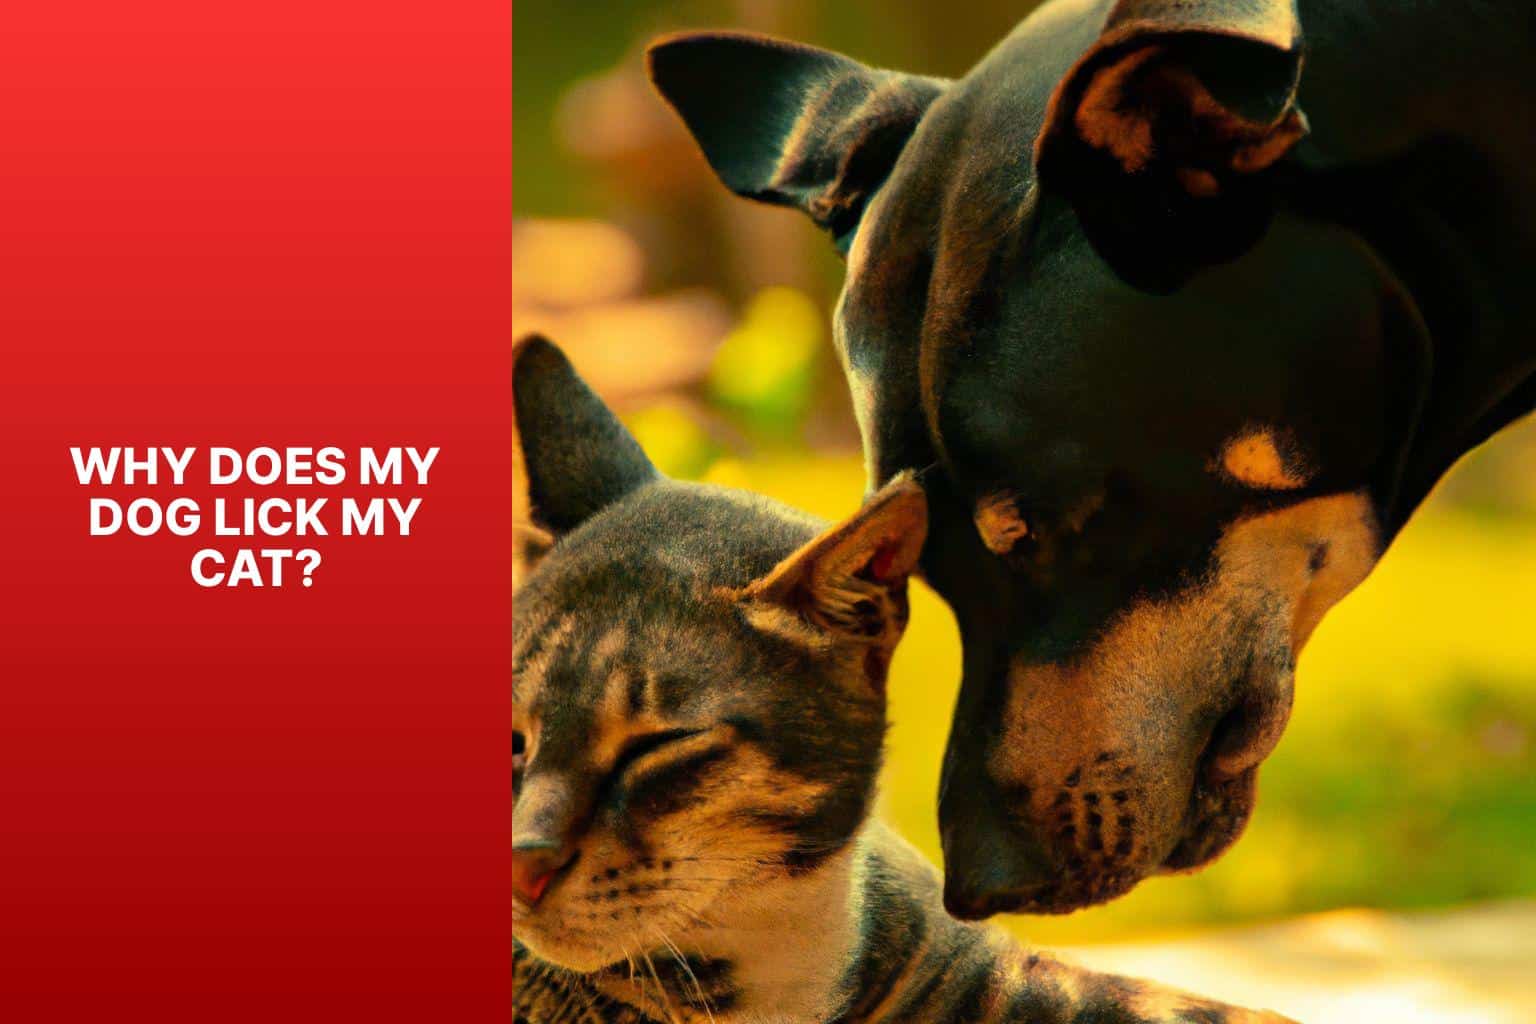 Why Does My Dog Lick My Cat? - Why Does My Dog Lick My Cat? 